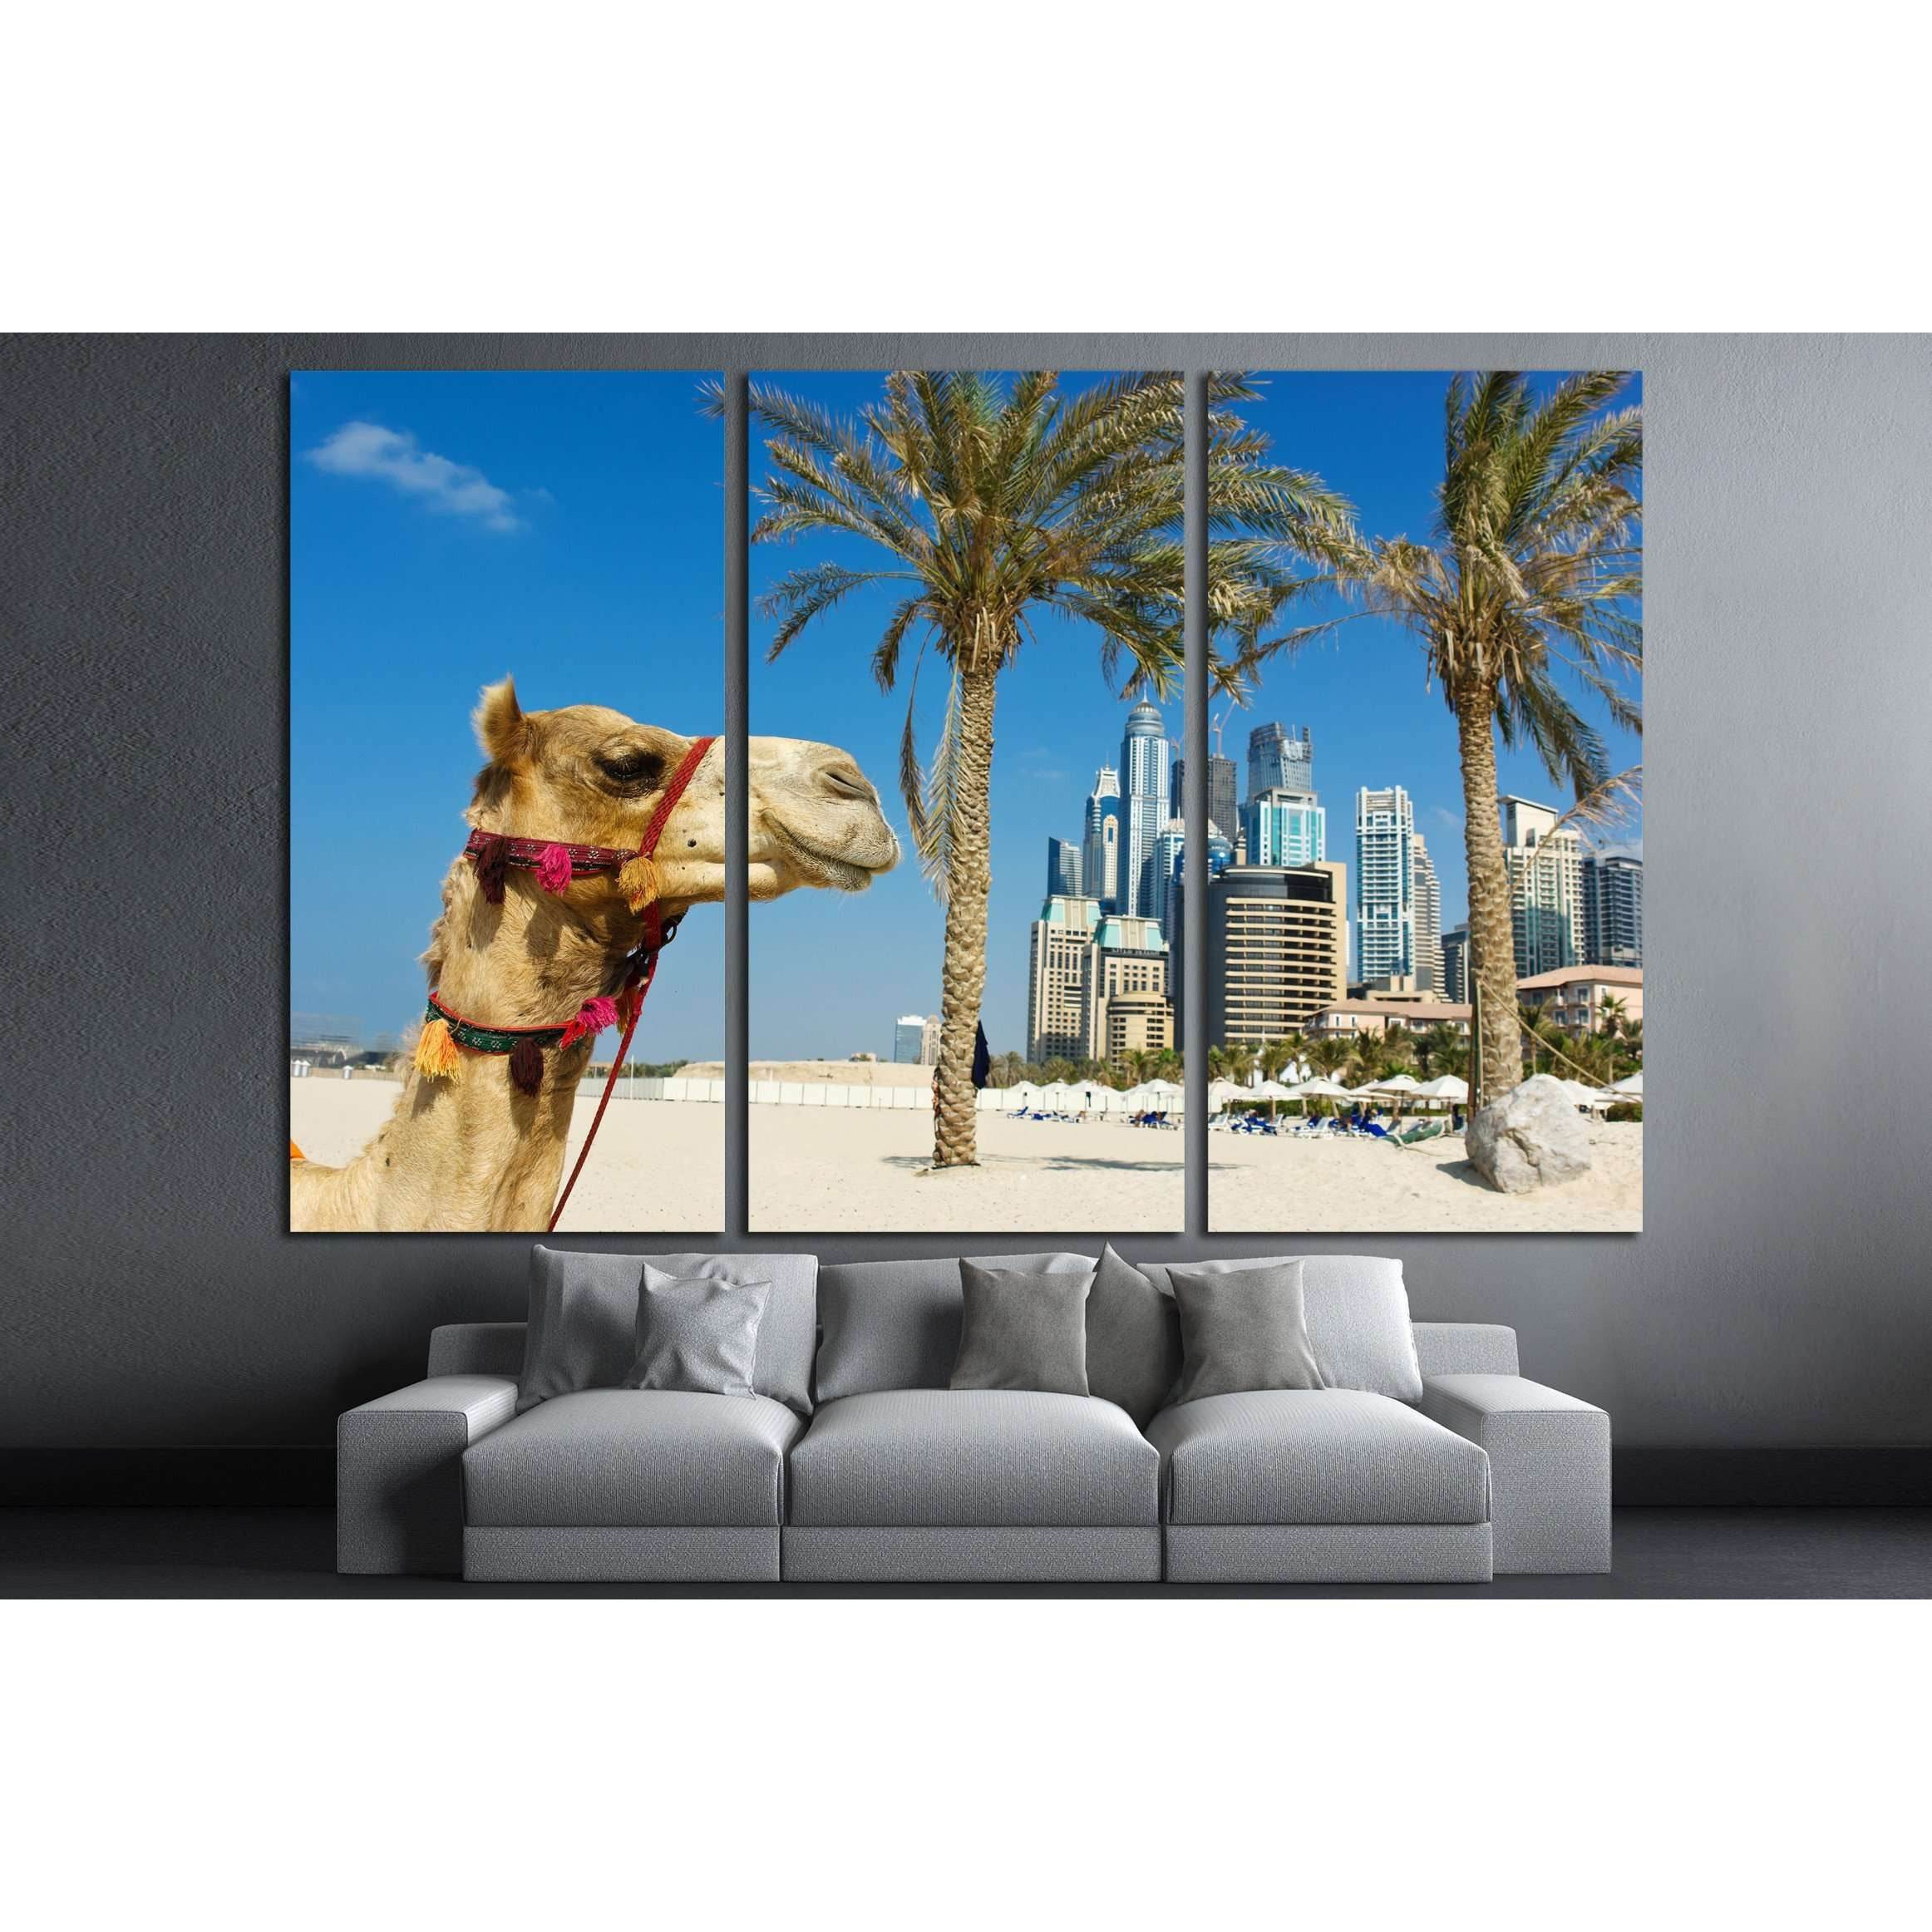 Camel at the urban building background of Dubai. UAE №2224 Ready to Hang Canvas Print